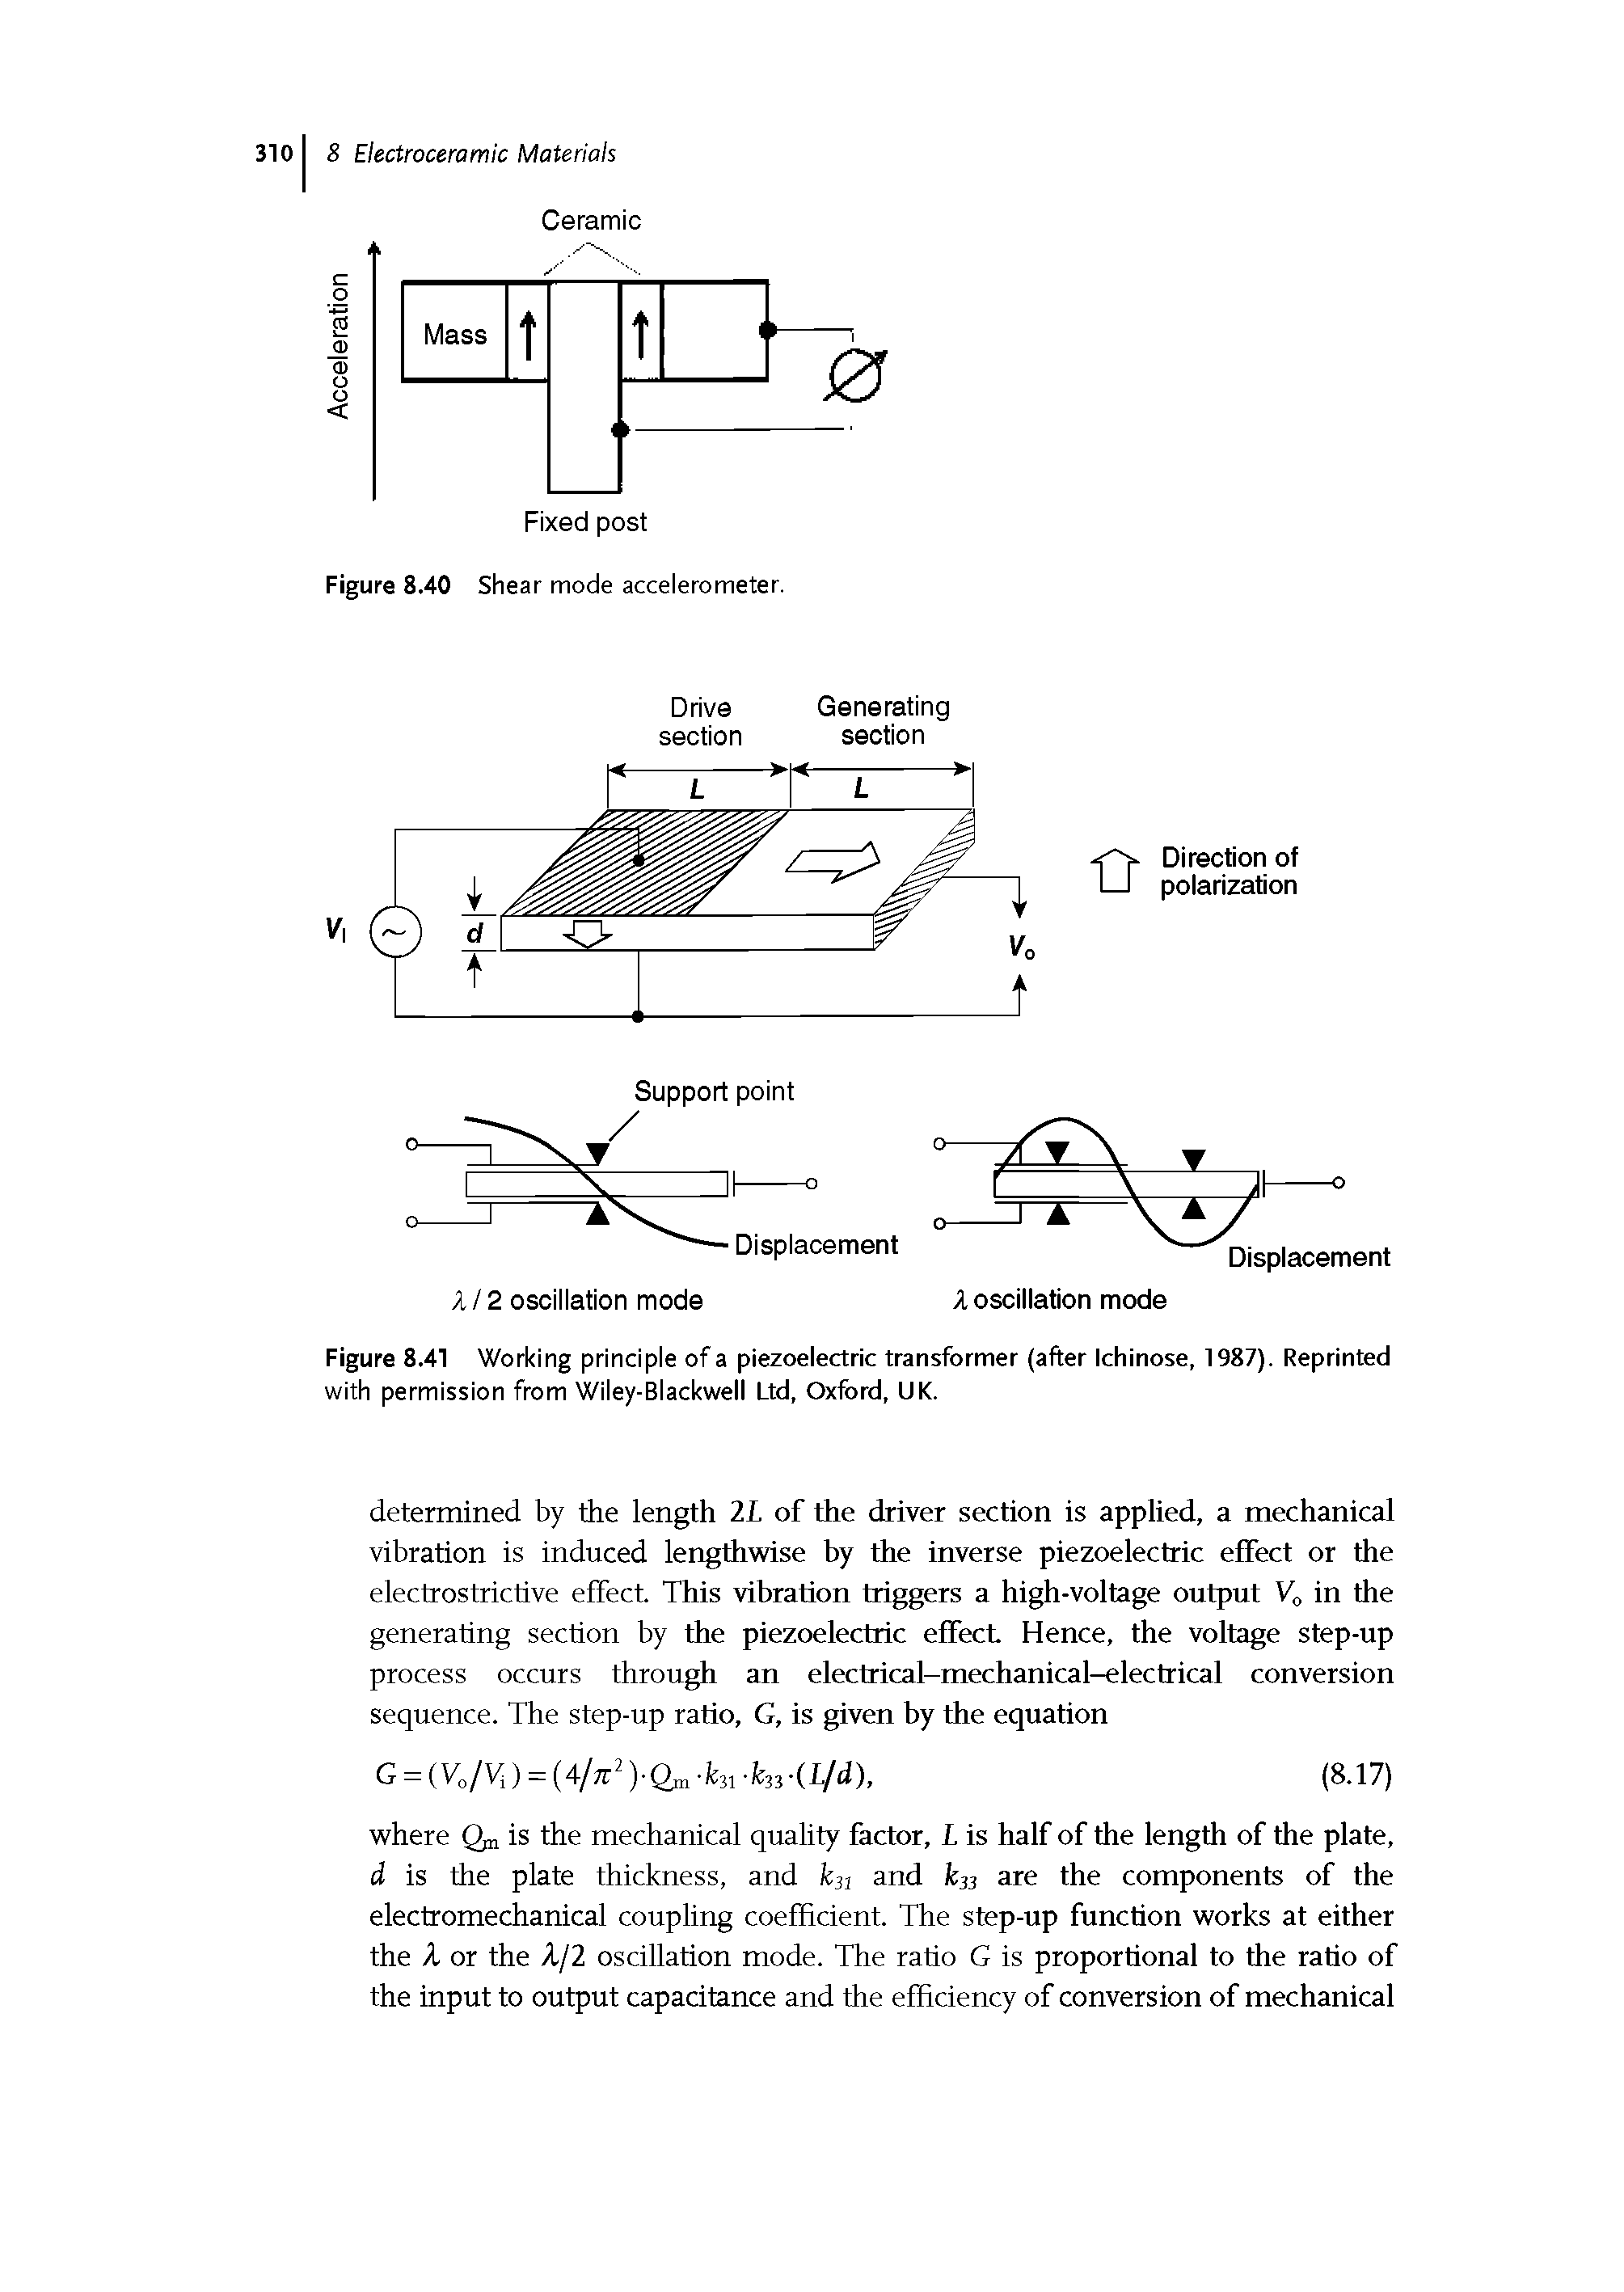 Figure 8.41 Working principle of a piezoelectric transformer (after Ichinose, 1987). Reprinted with permission from Wiley-Blackwell Ltd, Oxford, UK.